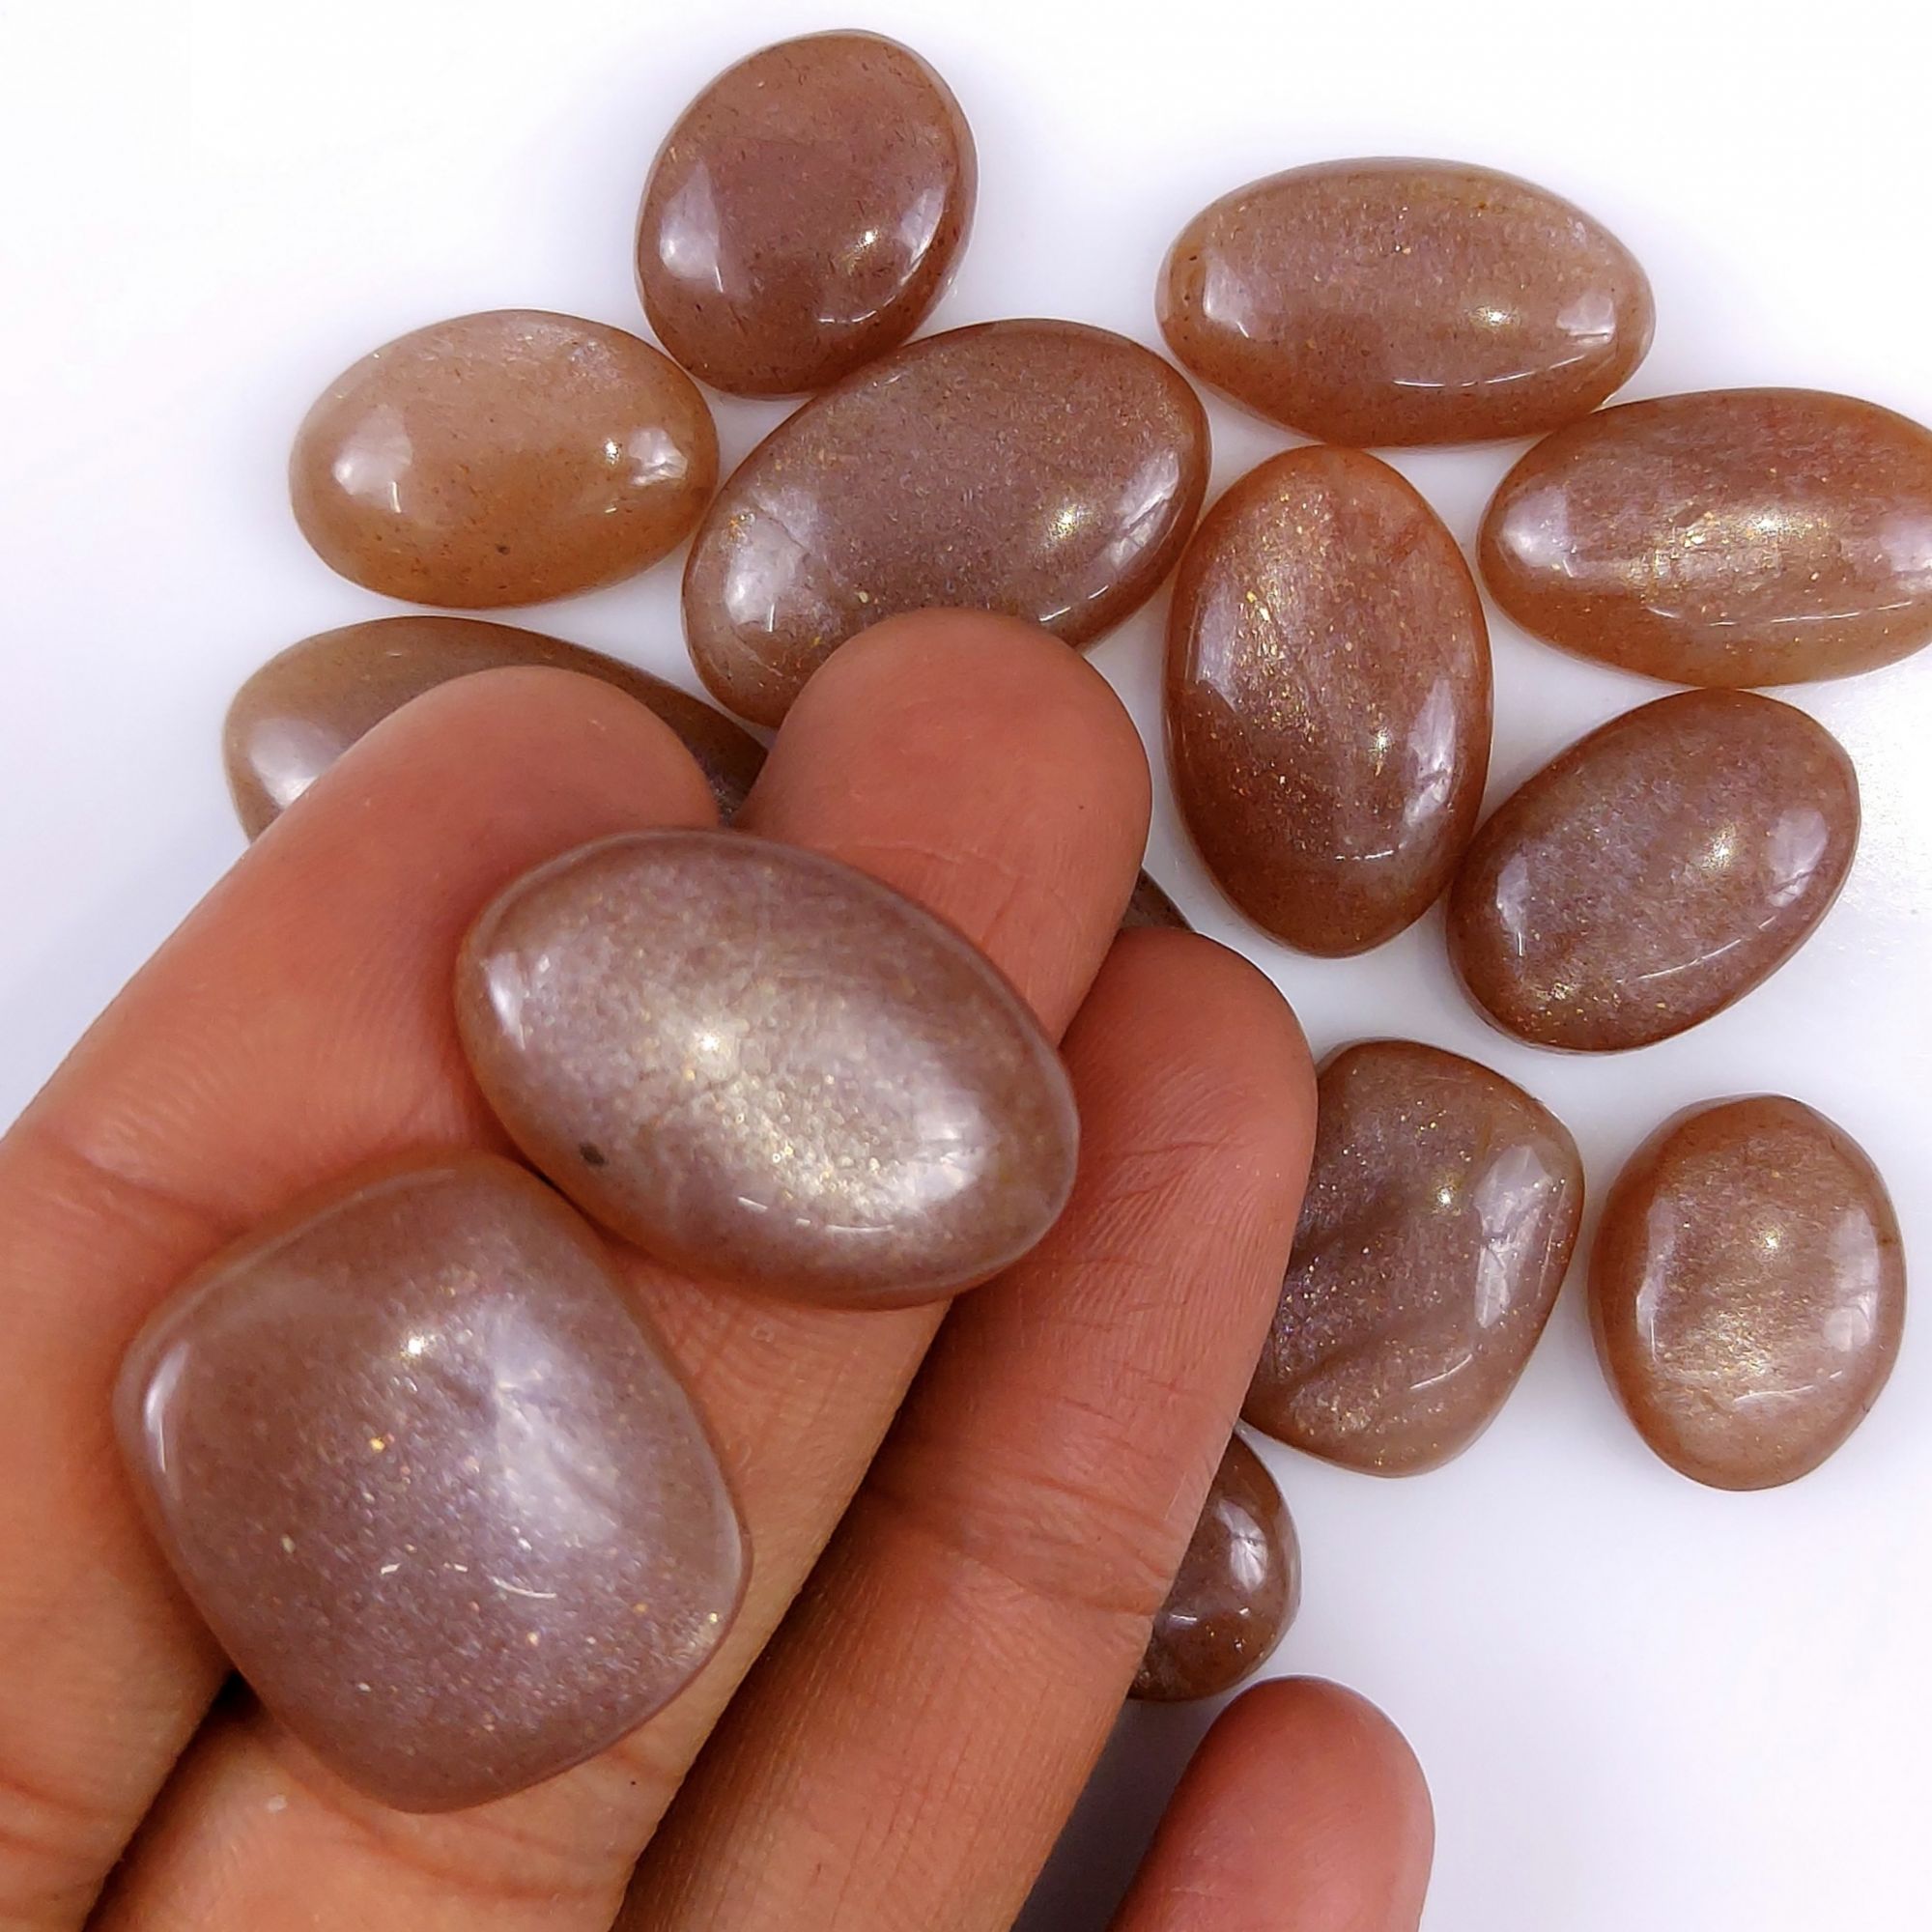 19Pcs 329Cts Natural Peach Moonstone Cabochon lot Gemstone Crystal Mix Shape Loose Gemstone beads for jewelry Making 32x18 14x14mm#7540